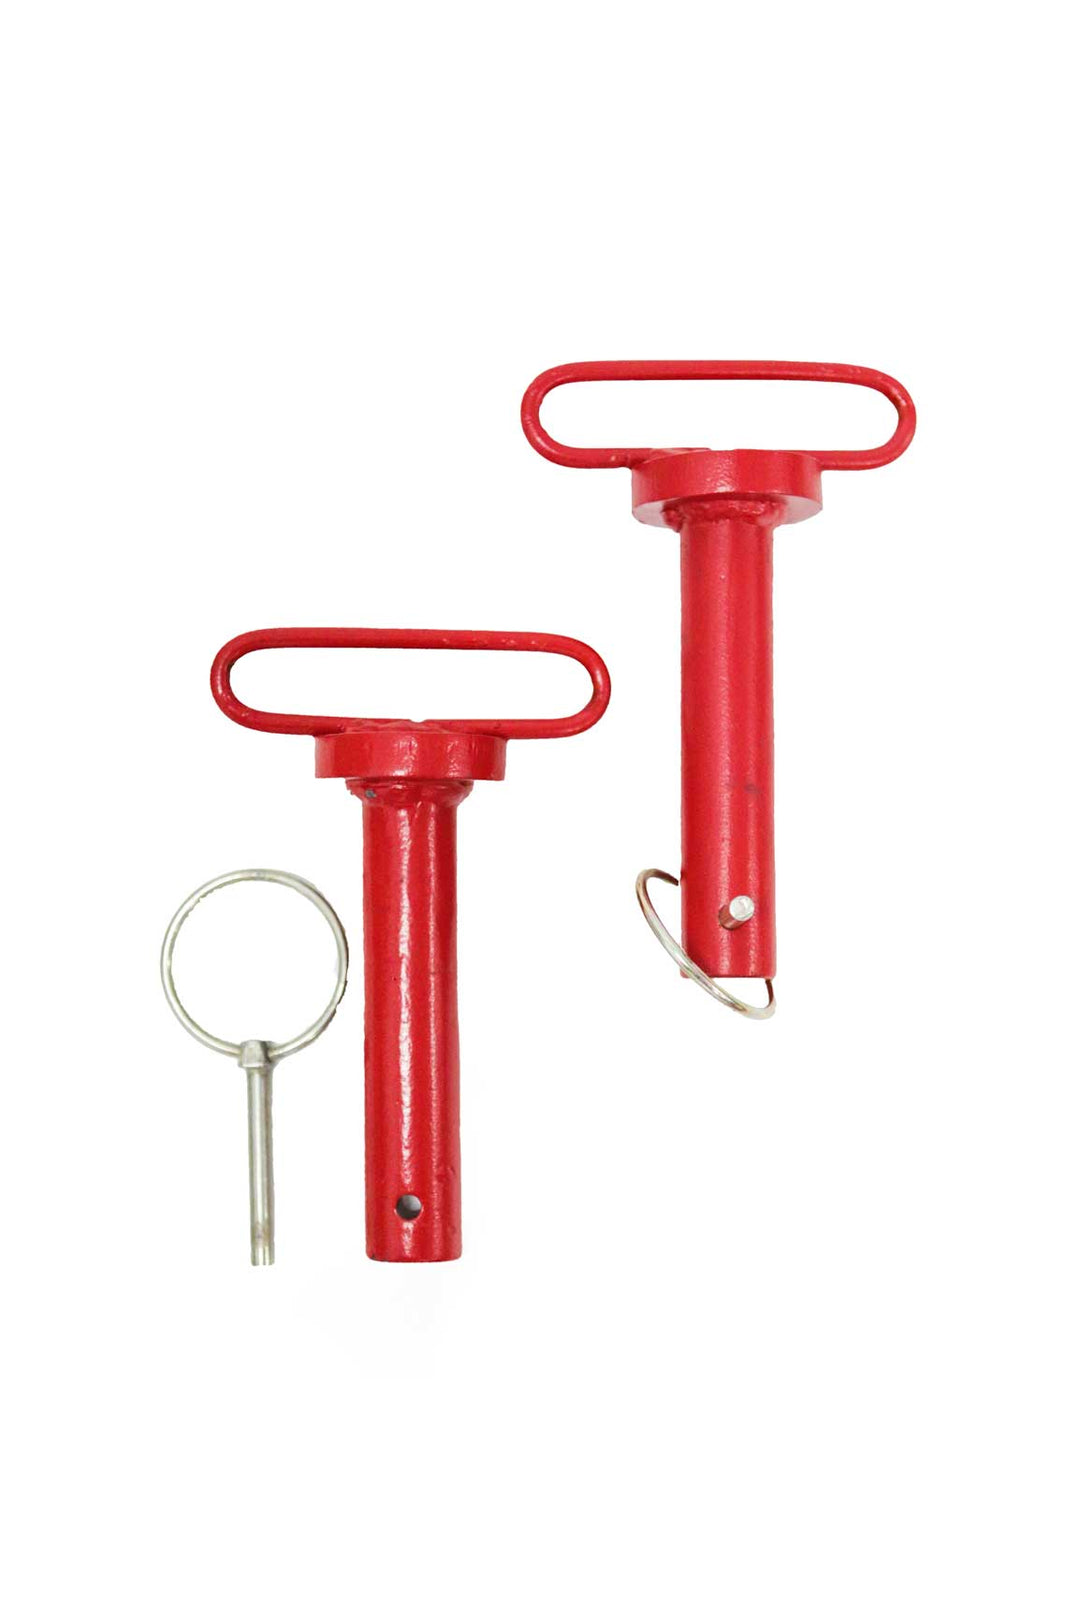 Red lock in pins for mono lift rack attachment